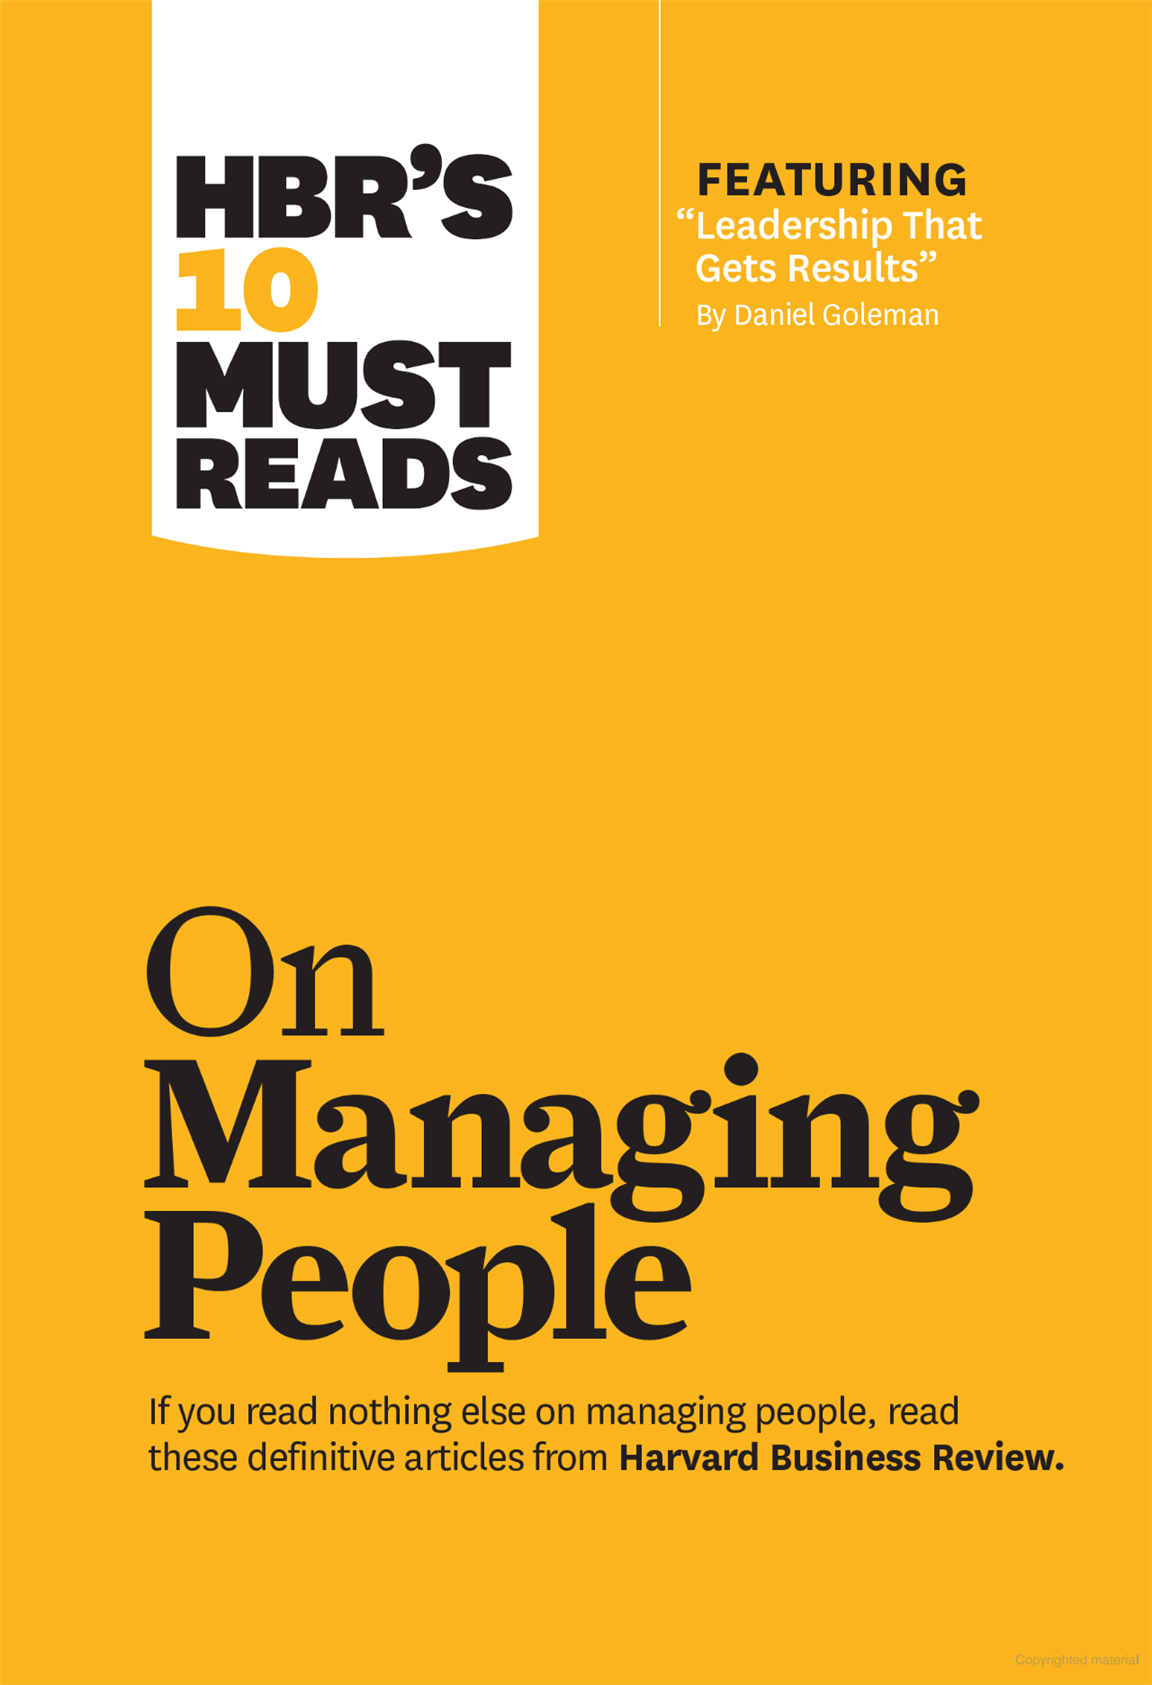 HBR's 10 Must Reads on Managing People Book